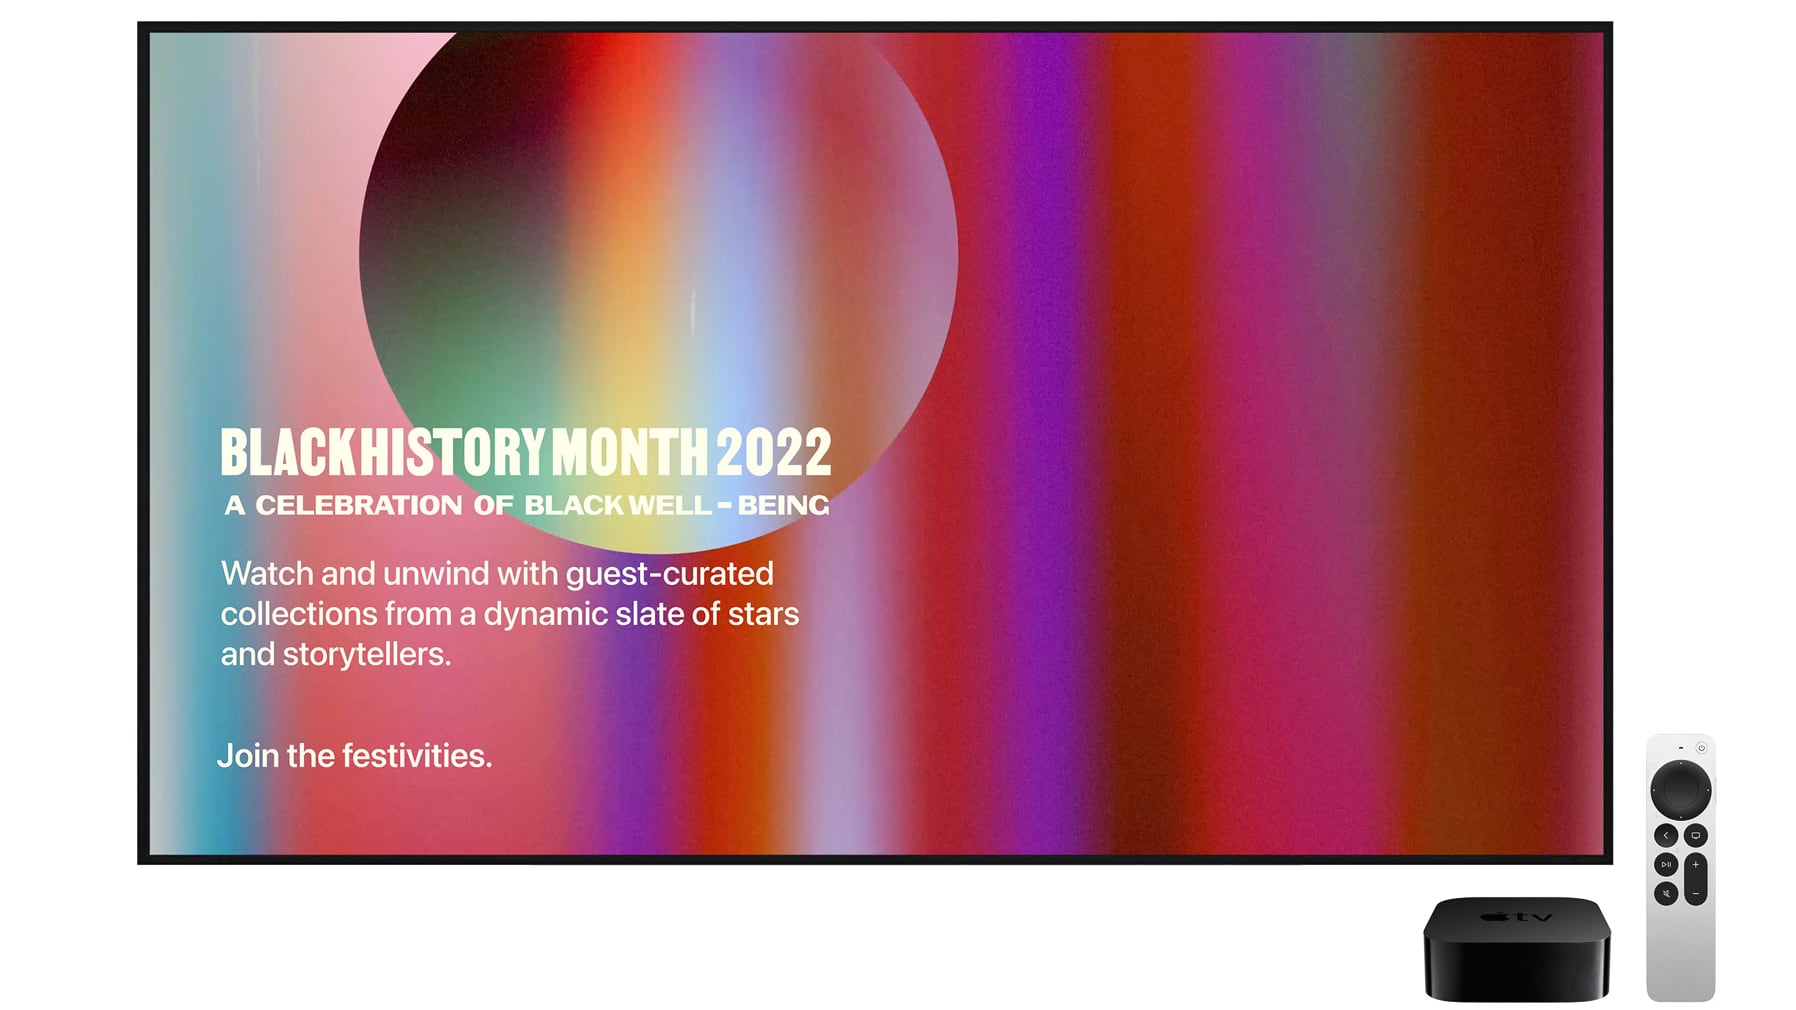 Apple's marketing image showing an Apple TV highlighting content specials to celebrate 2022 Black History Month